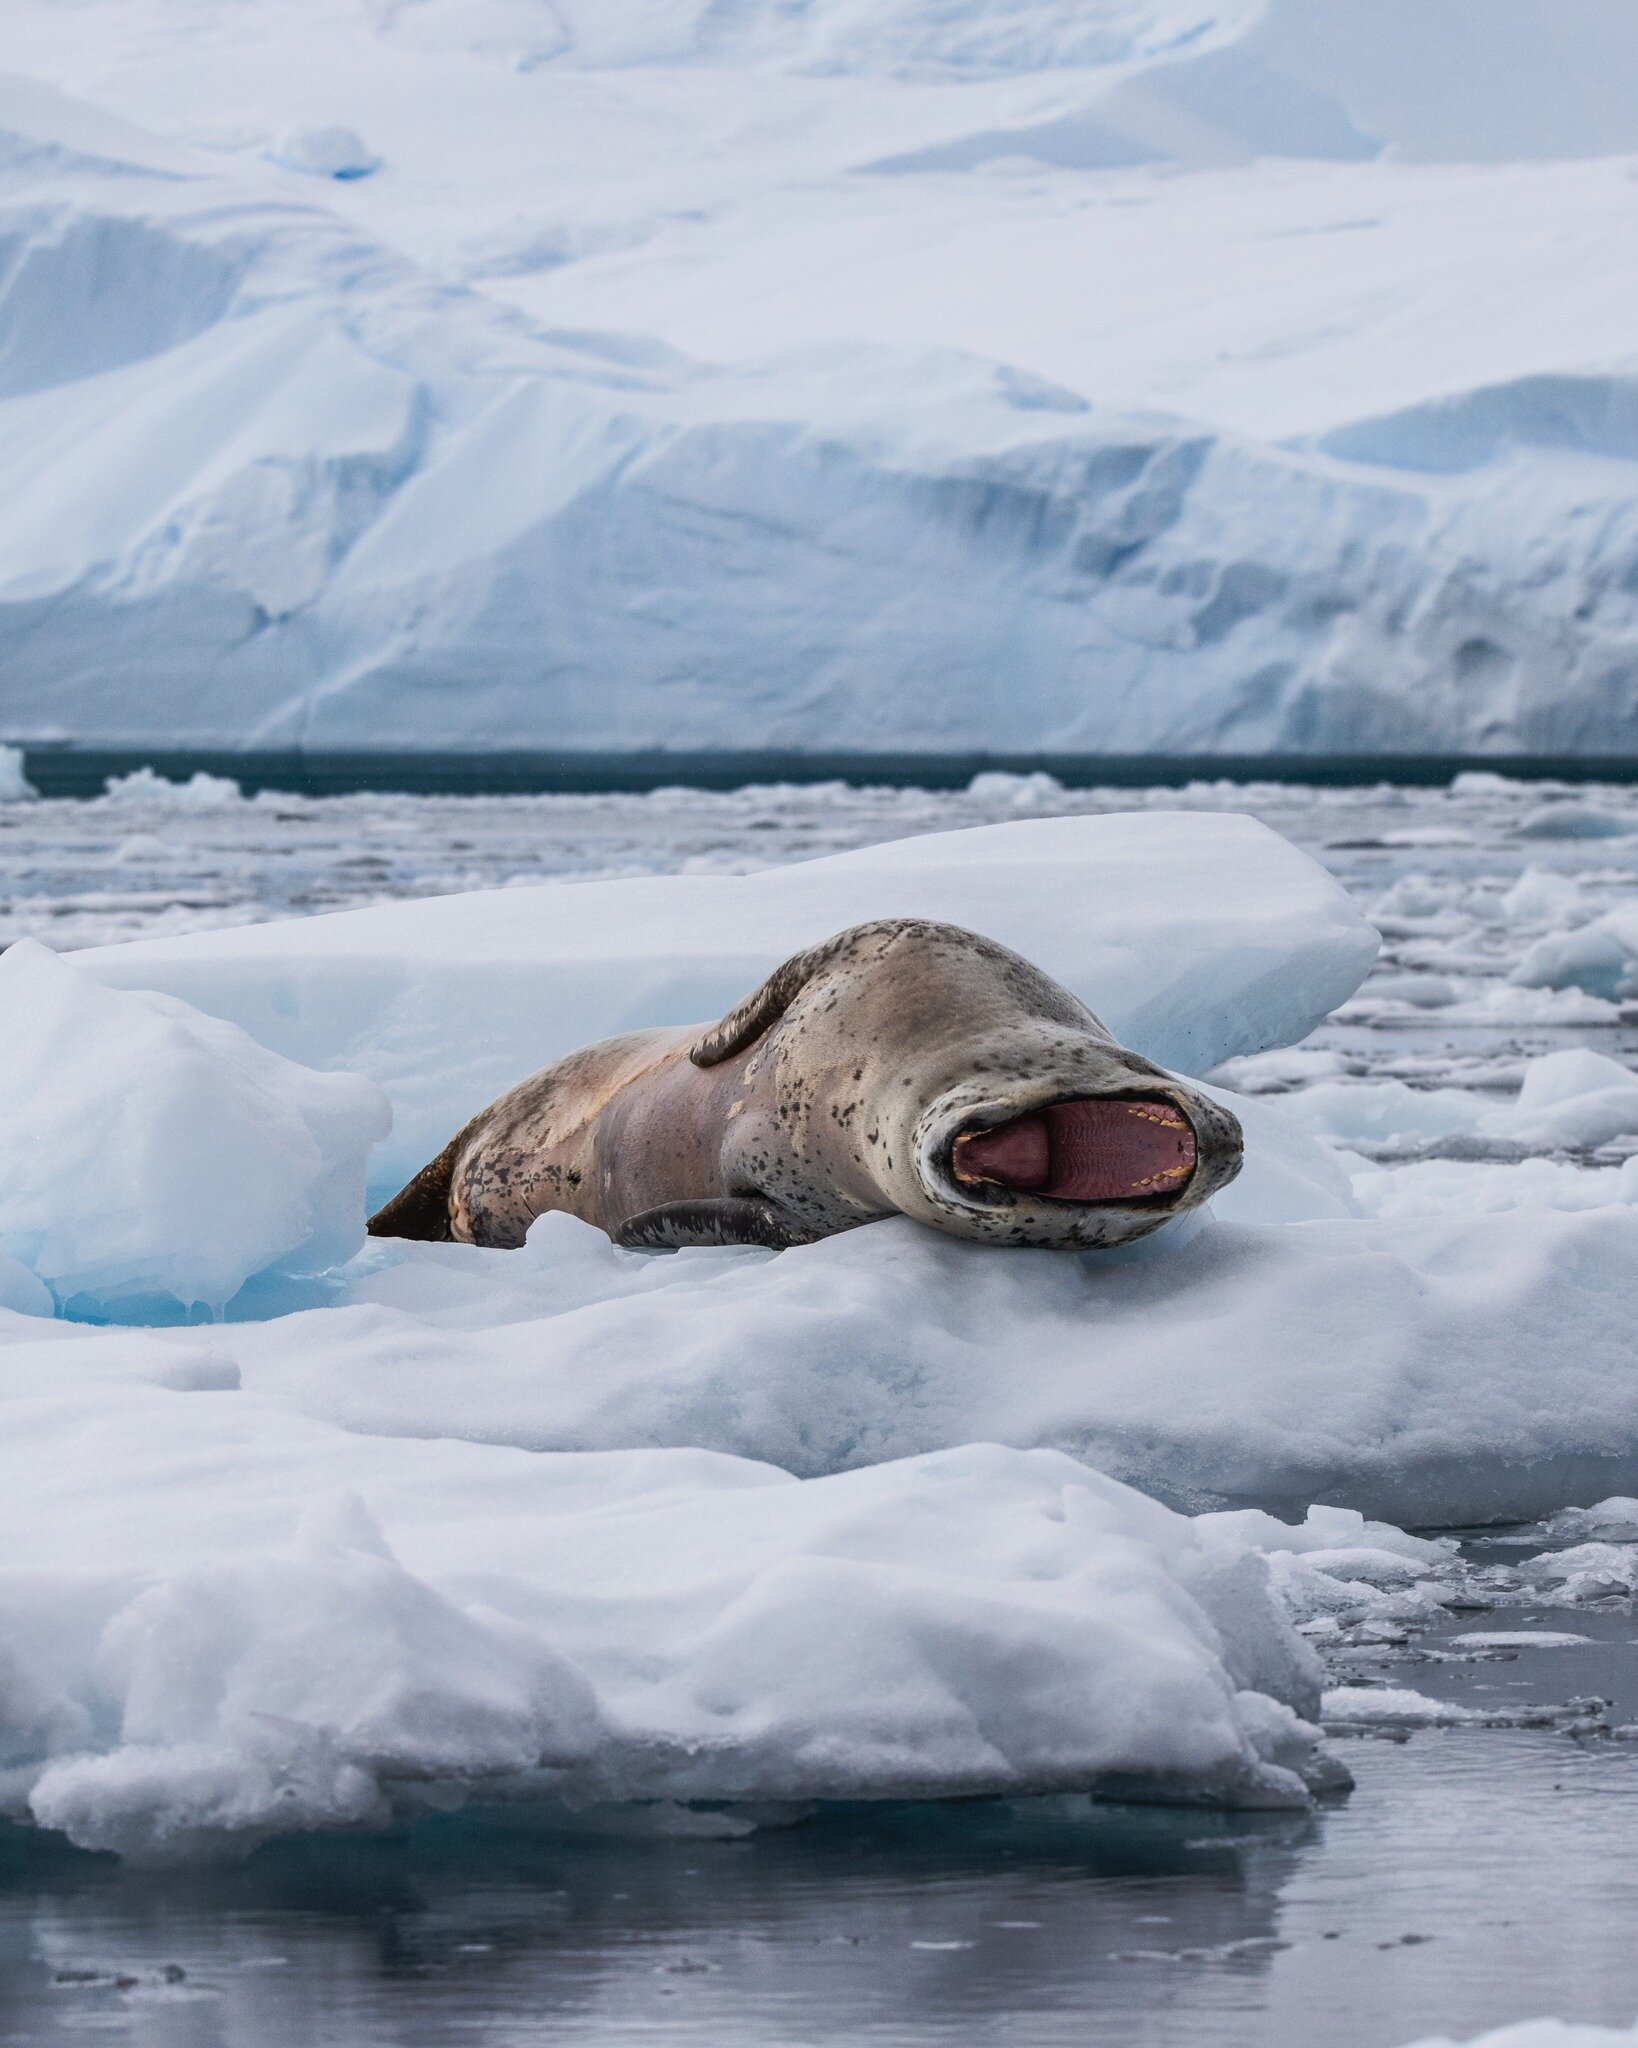 An incredibly lucky morning at Neko Harbour watching 2 different Leopard Seals resting on some ice floes. These prehistoric looking seals are always high on my list of animals to watch in Antarctica and I always feel so lucky when I spot them. The wi